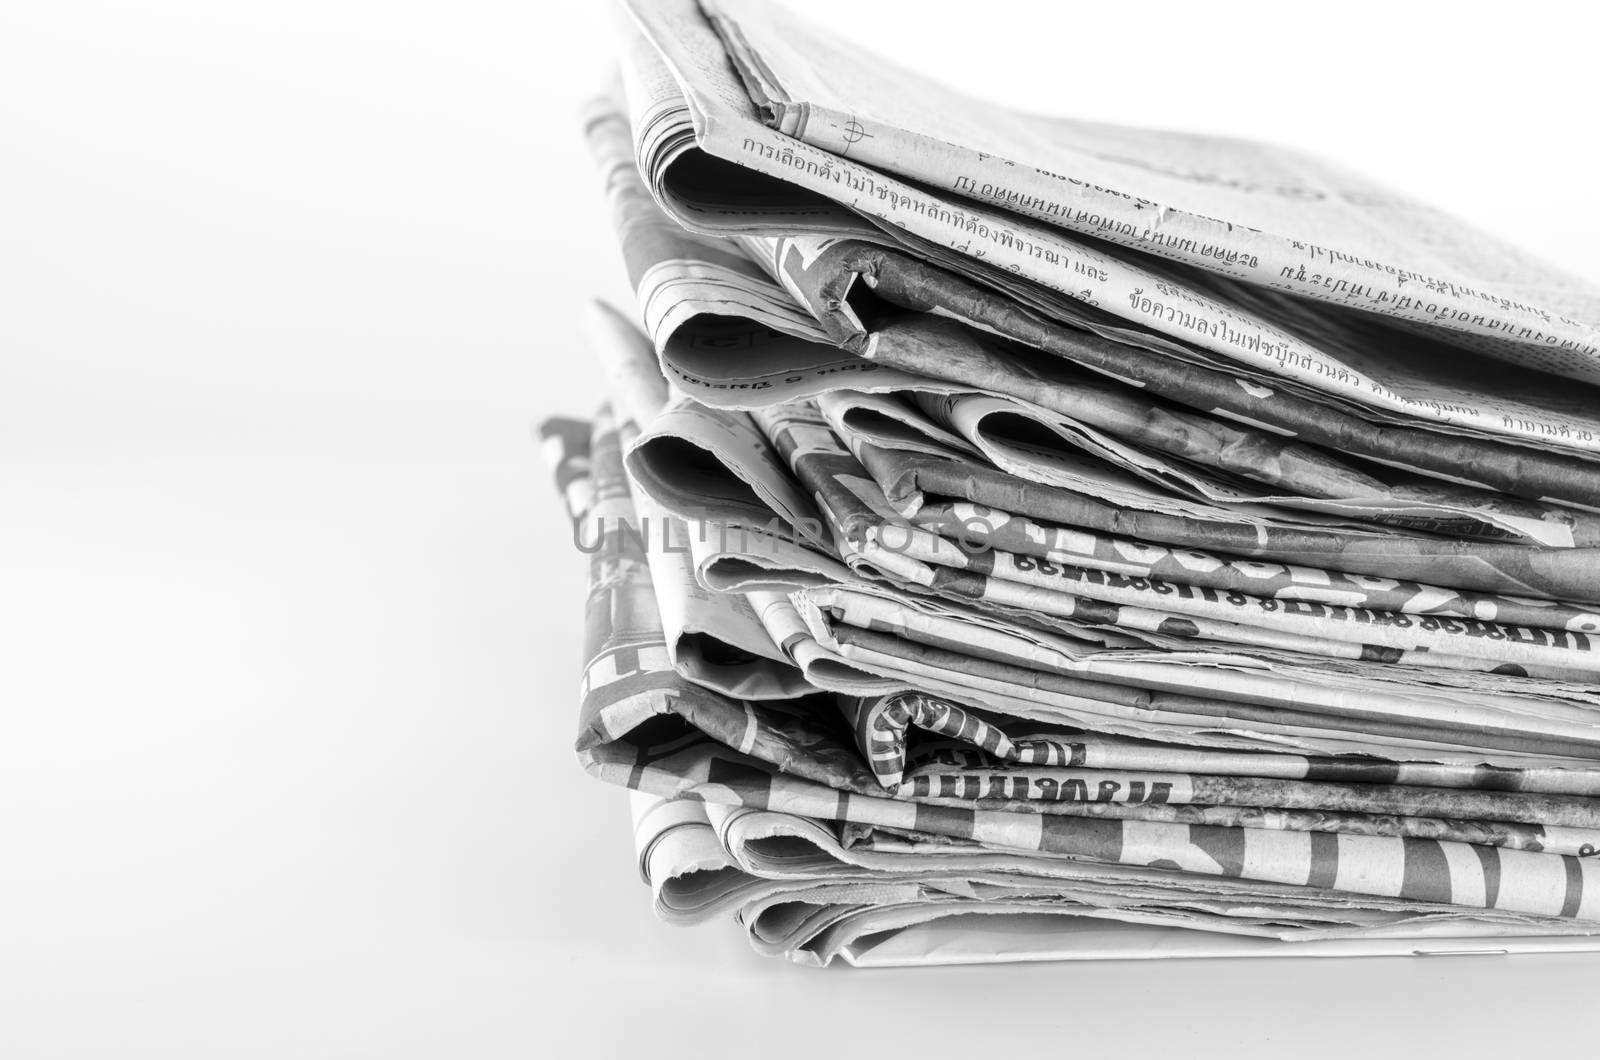 black and white stack of newspaper